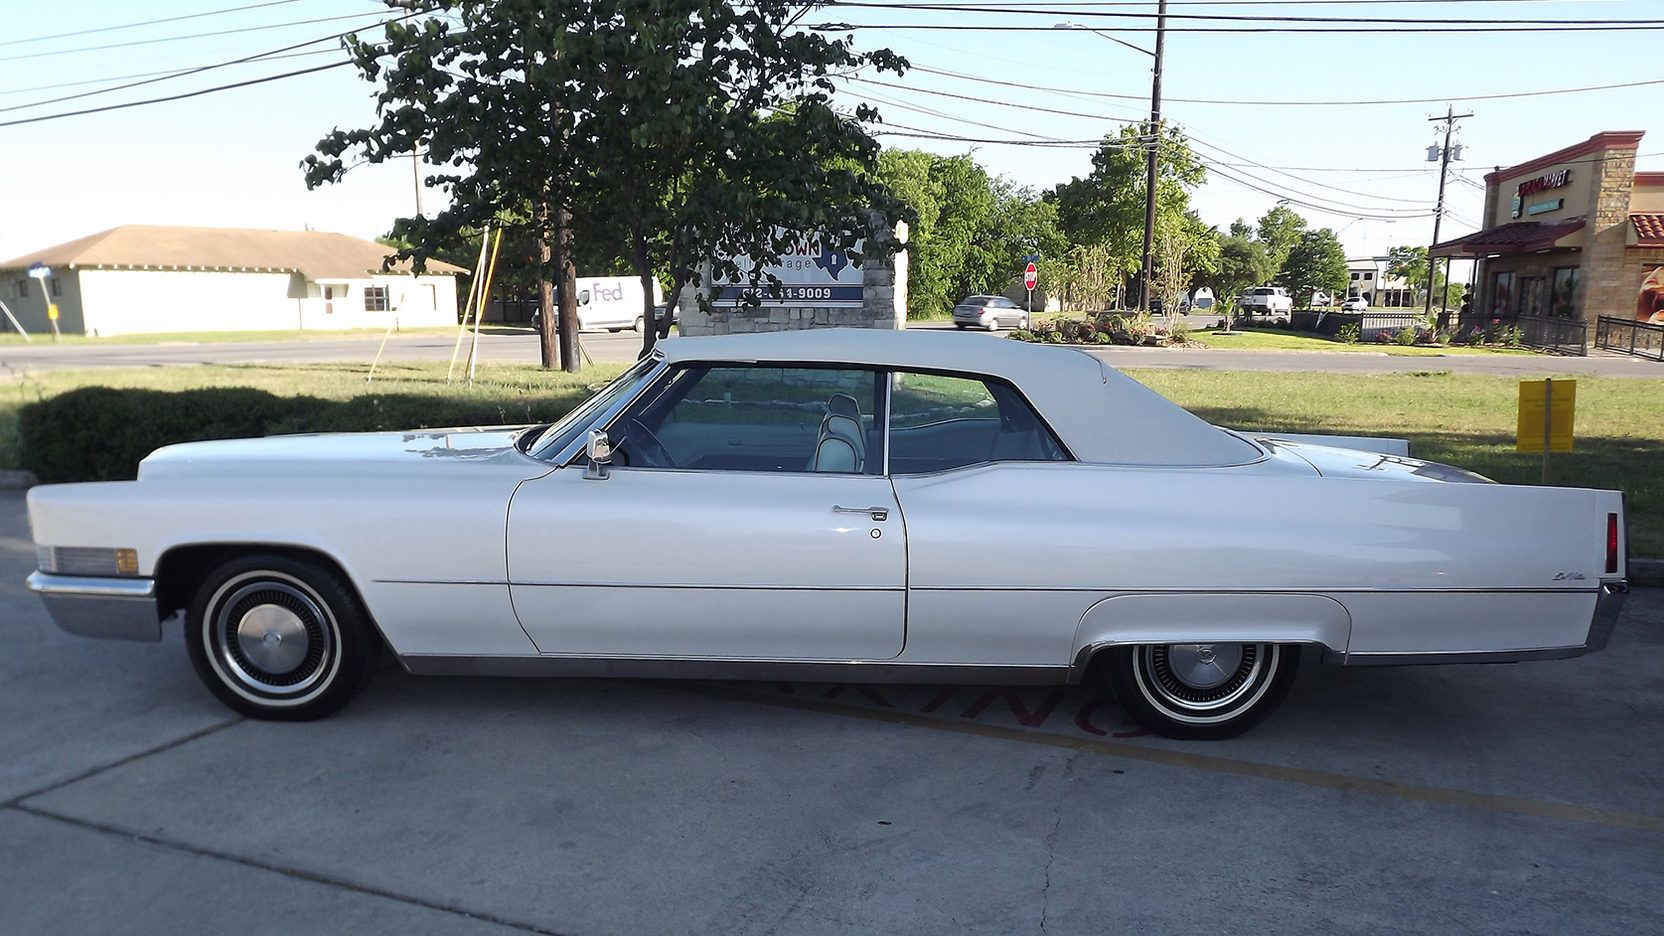 White 1970 Cadillac DeVille on the driveway